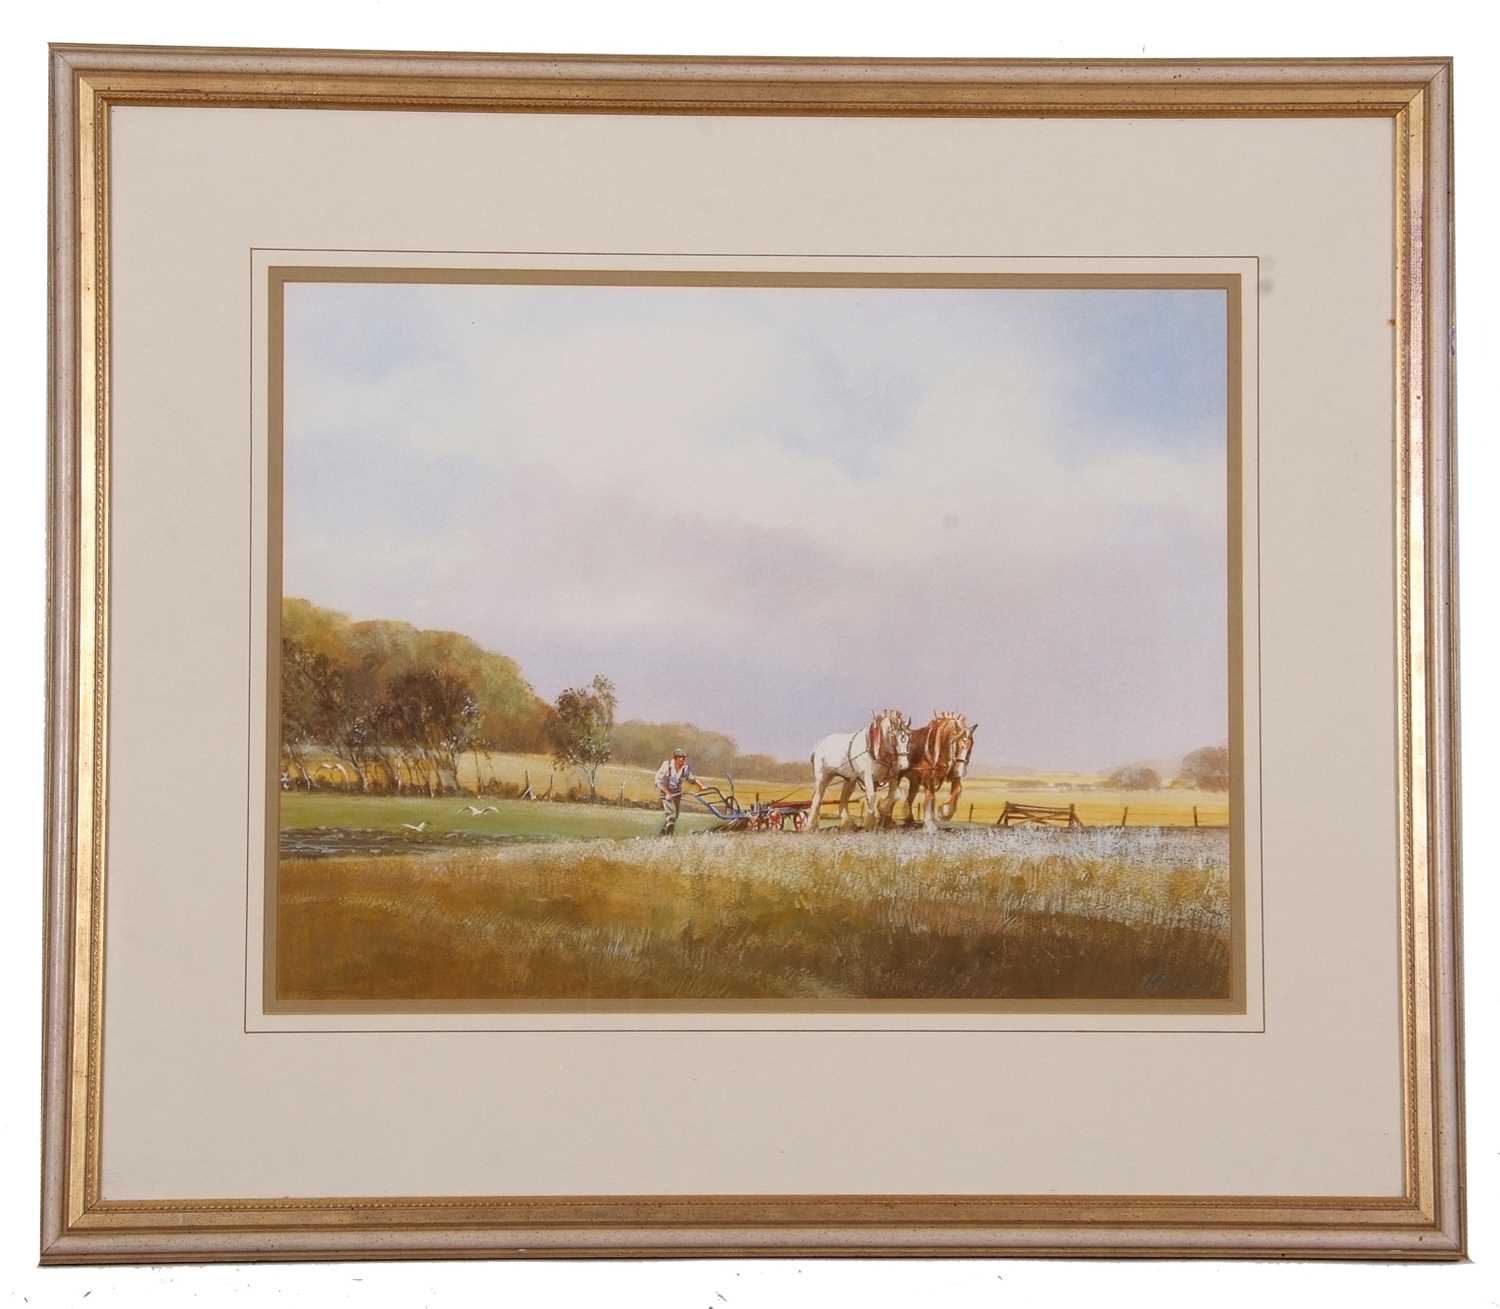 Michael J. Sanders (British, b.1950), Shirehorses and plough, watercolour,14x18ins, signed, mounted, - Image 2 of 3